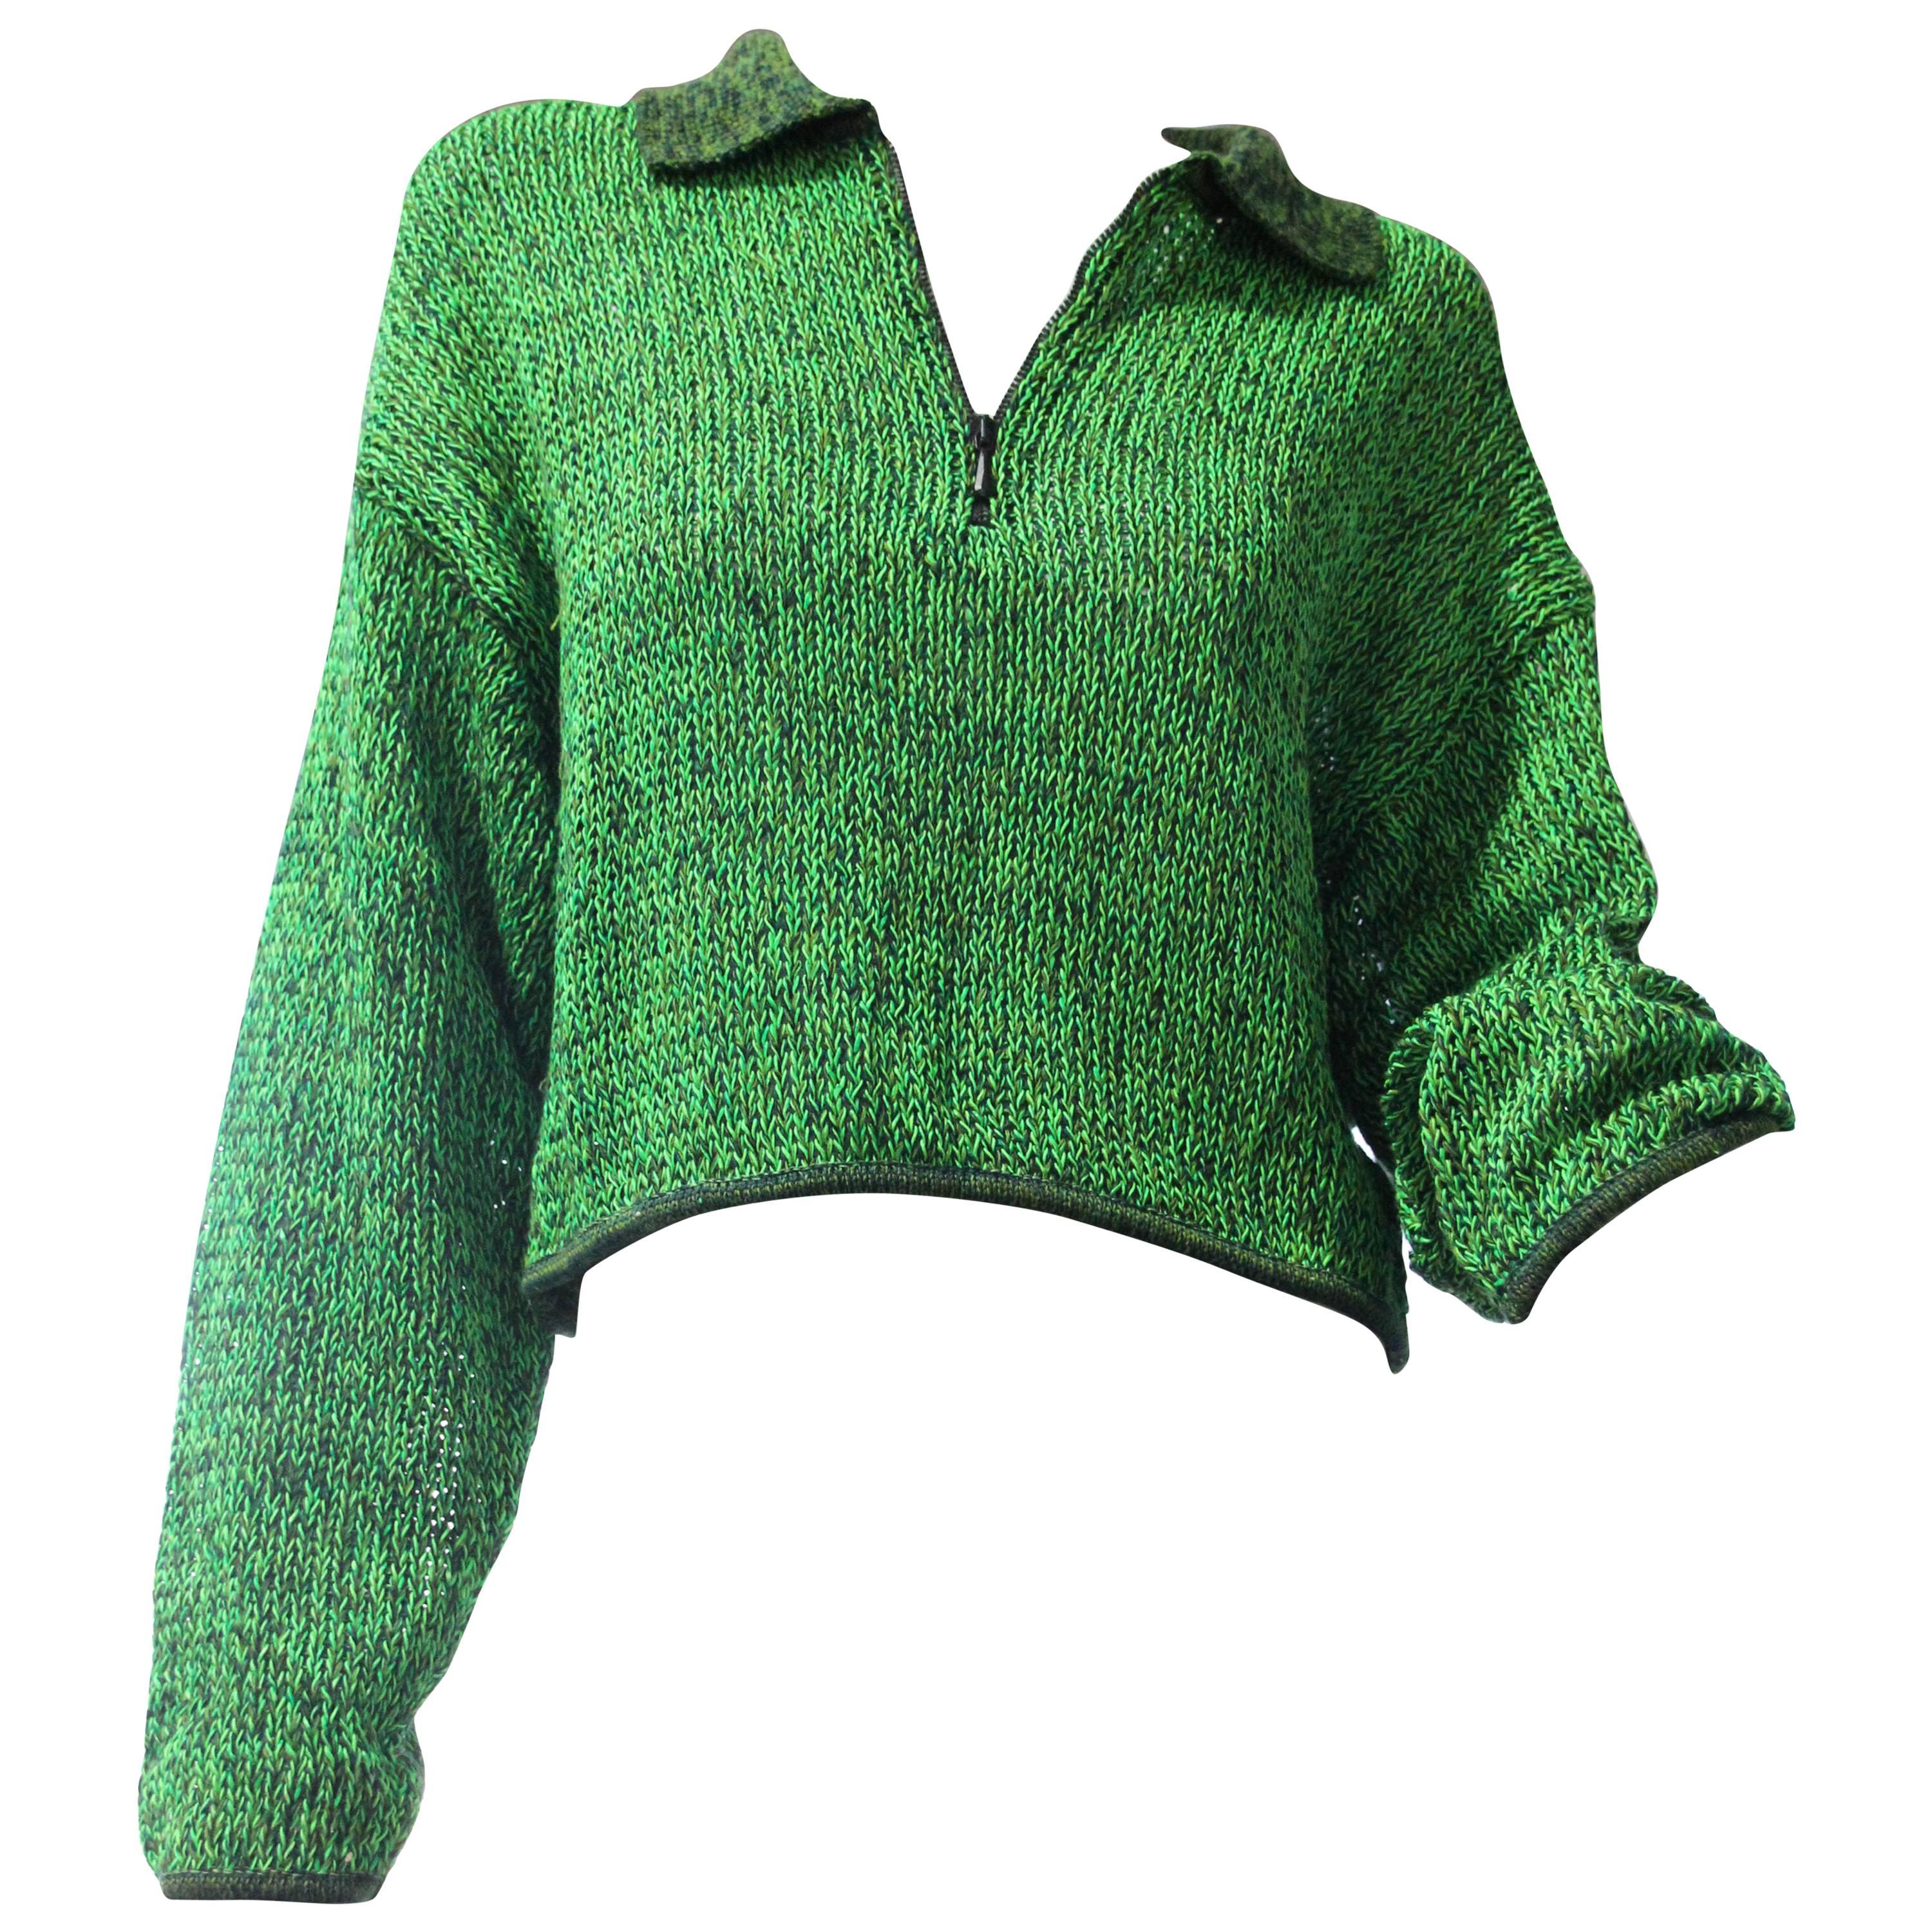 1980s Jean Paul Gaultier Cropped Zip-Front Sweater in Neon Green and Black